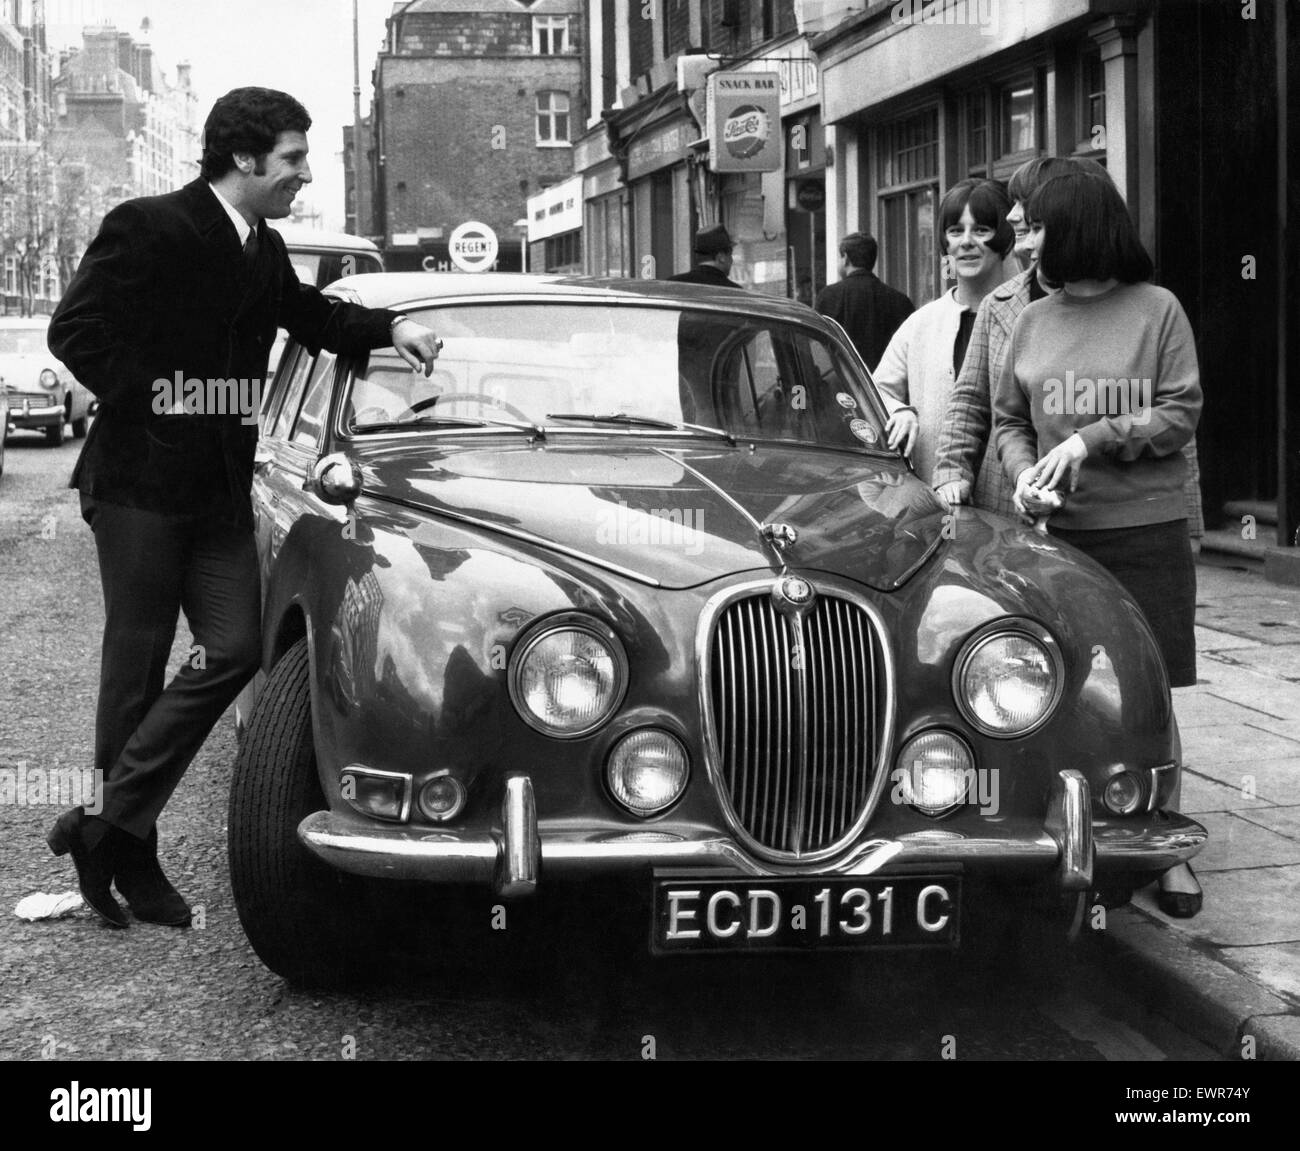 Welsh singing star Tom Jones shows off his new Jaguar car to three young fans in London today. 27th April 1966 Stock Photo